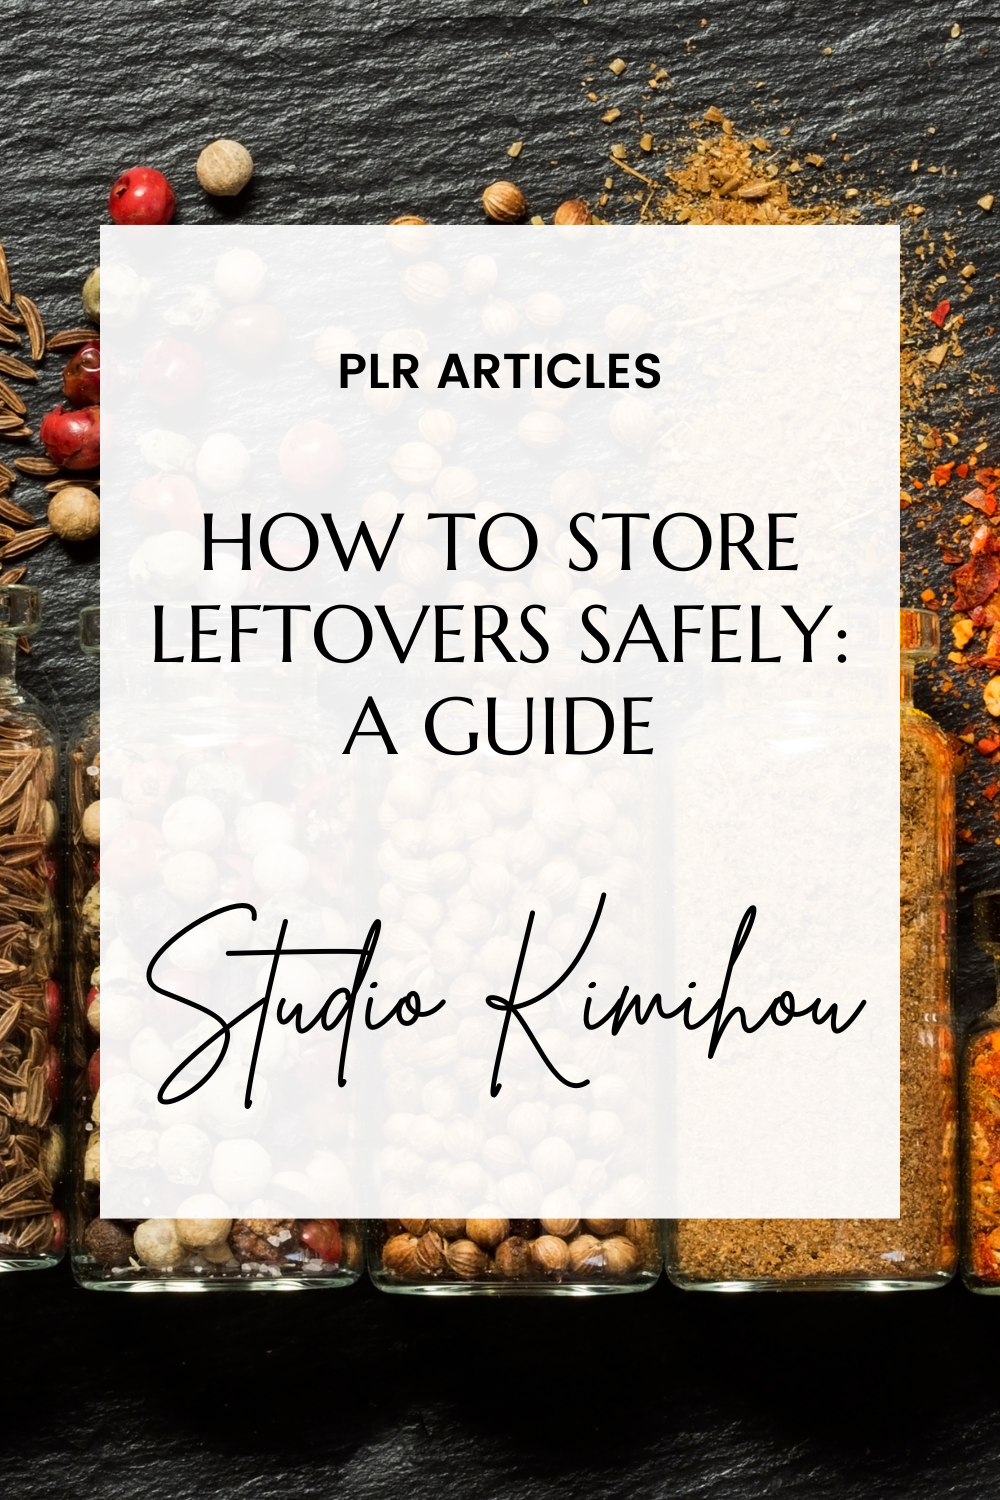 Article: How to Store Leftovers Safely: A Guide